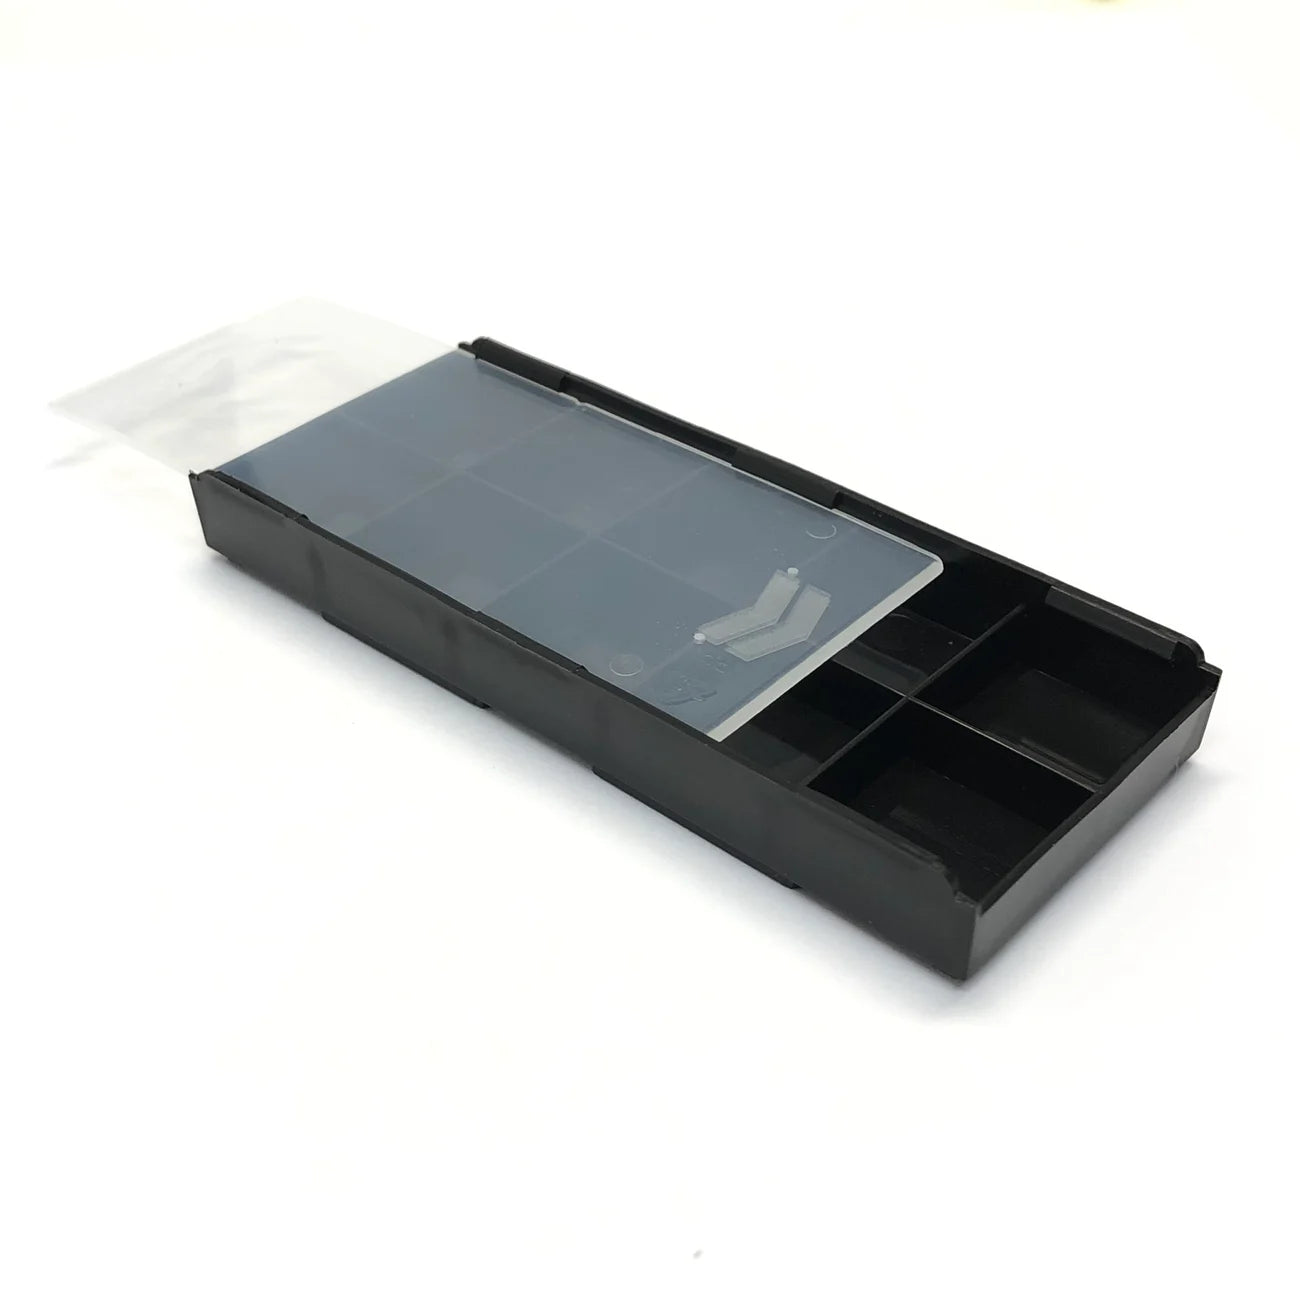 Black Plastic Storage Box for Fingerboard Parts; Designed to securely store and organize fingerboard components; Made from durable black plastic for long-lasting use; Keeps your fingerboard parts neatly organized and protected; Convenient and portable for on-the-go use; Ideal for keeping your fingerboard accessories in one place.